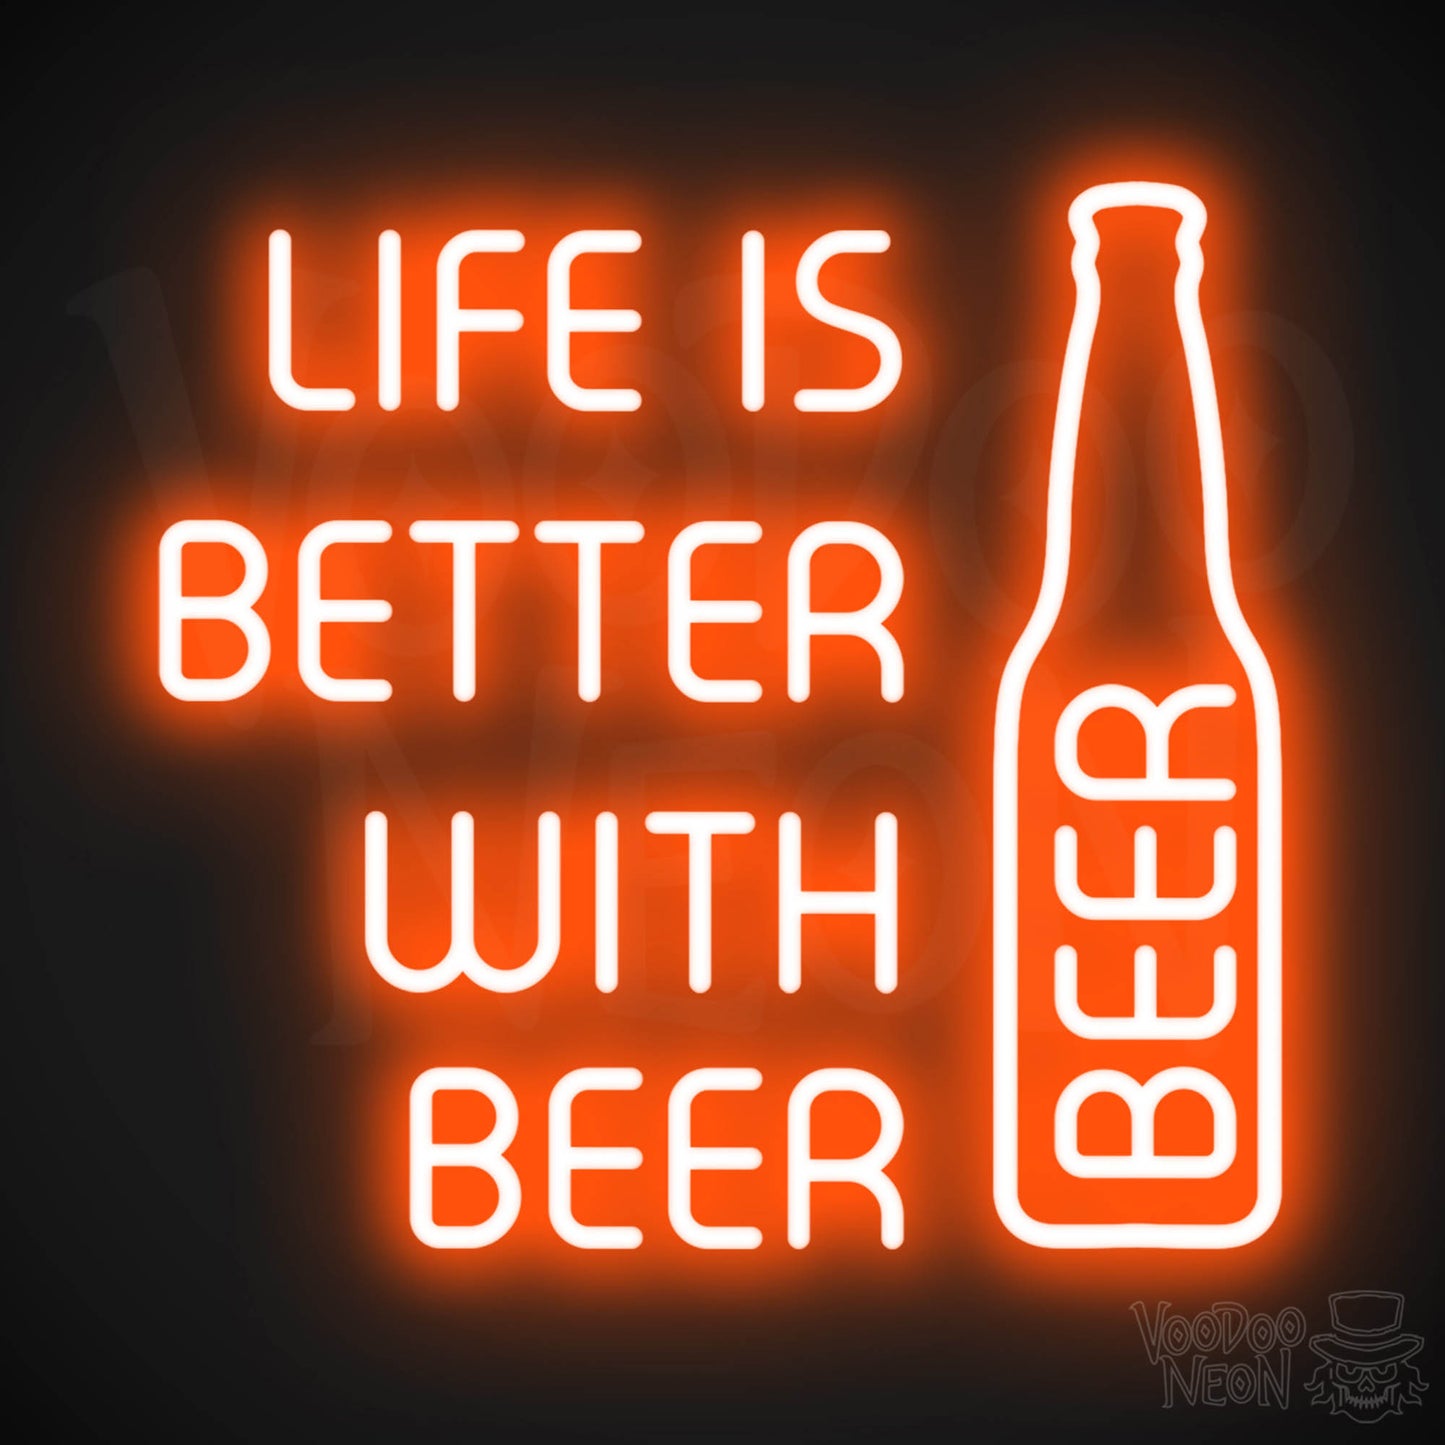 Life Is Better With Beer LED Neon - Orange